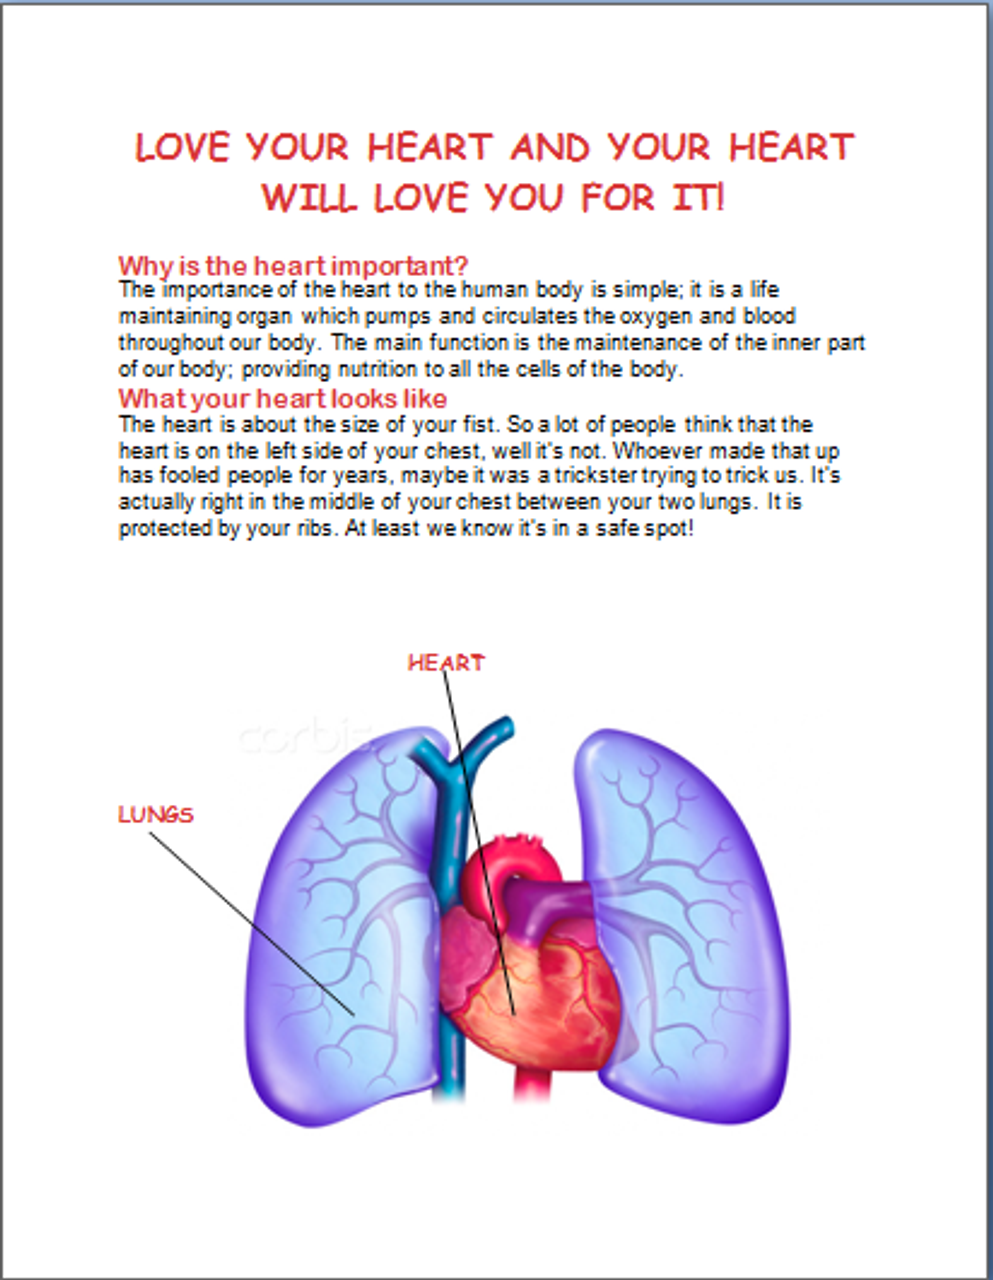 Love your Heart- Your Heart will love you for it! - Amped Up Learning